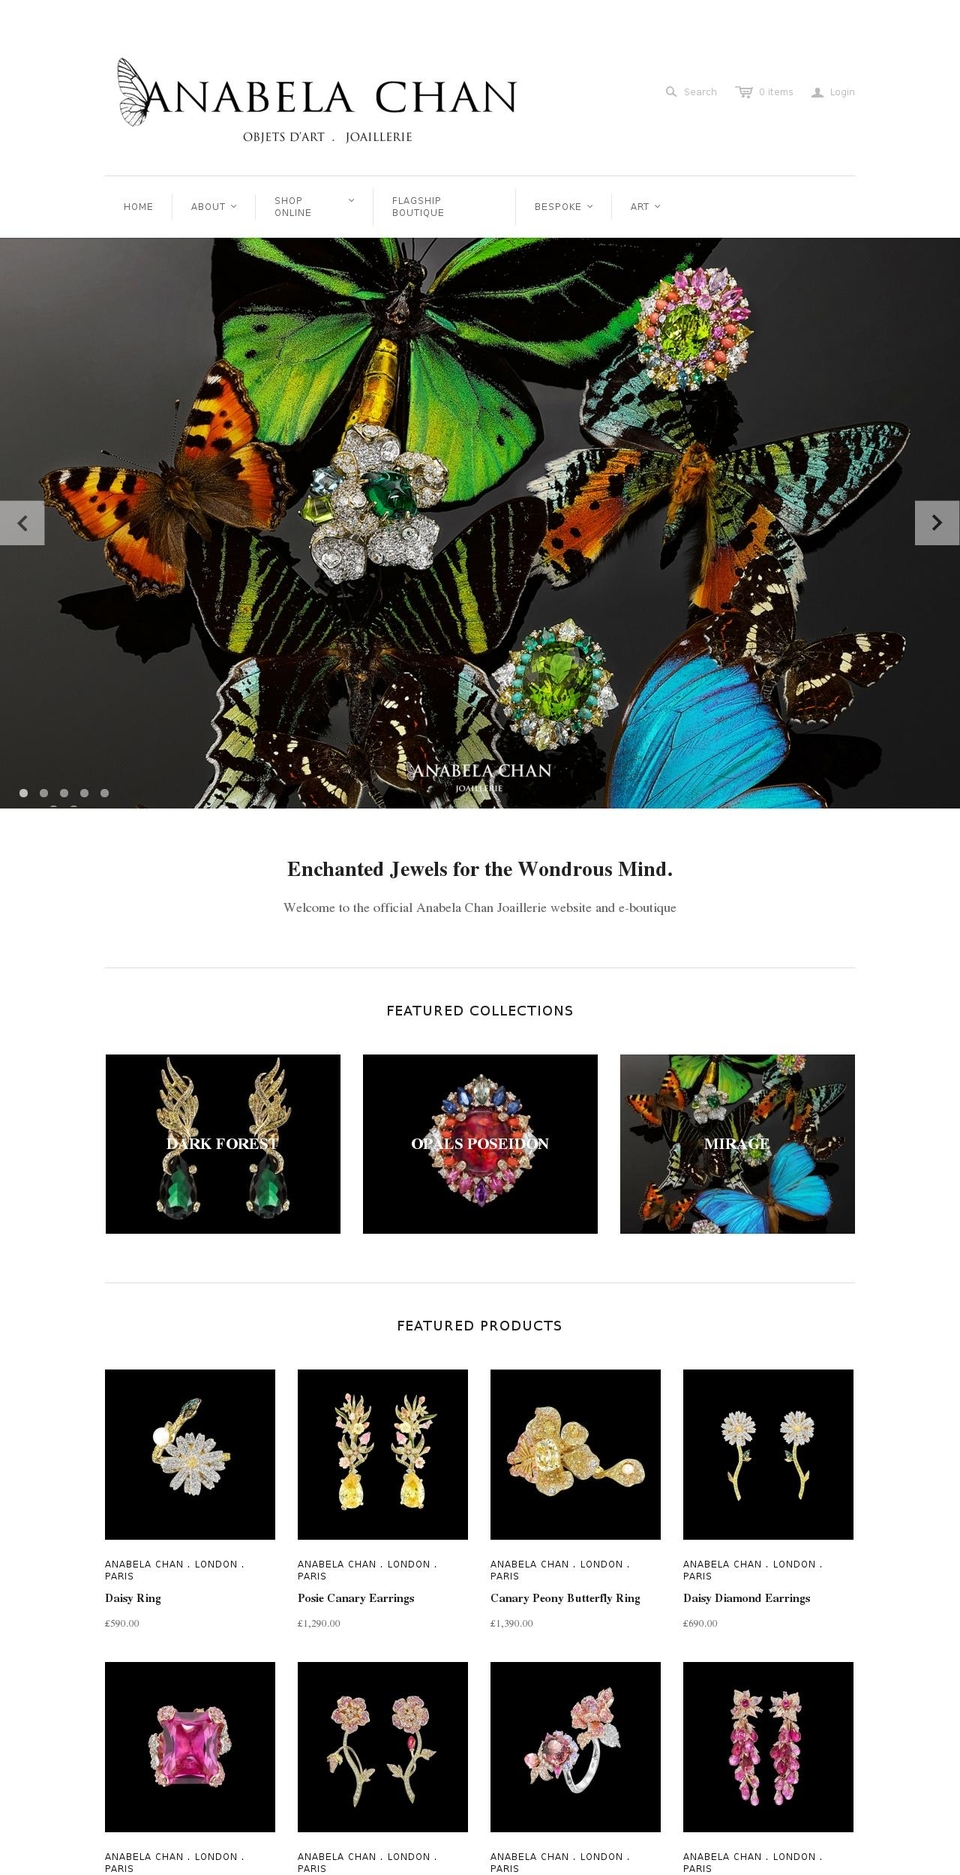 Halo Shopify theme site example anabelachan.com